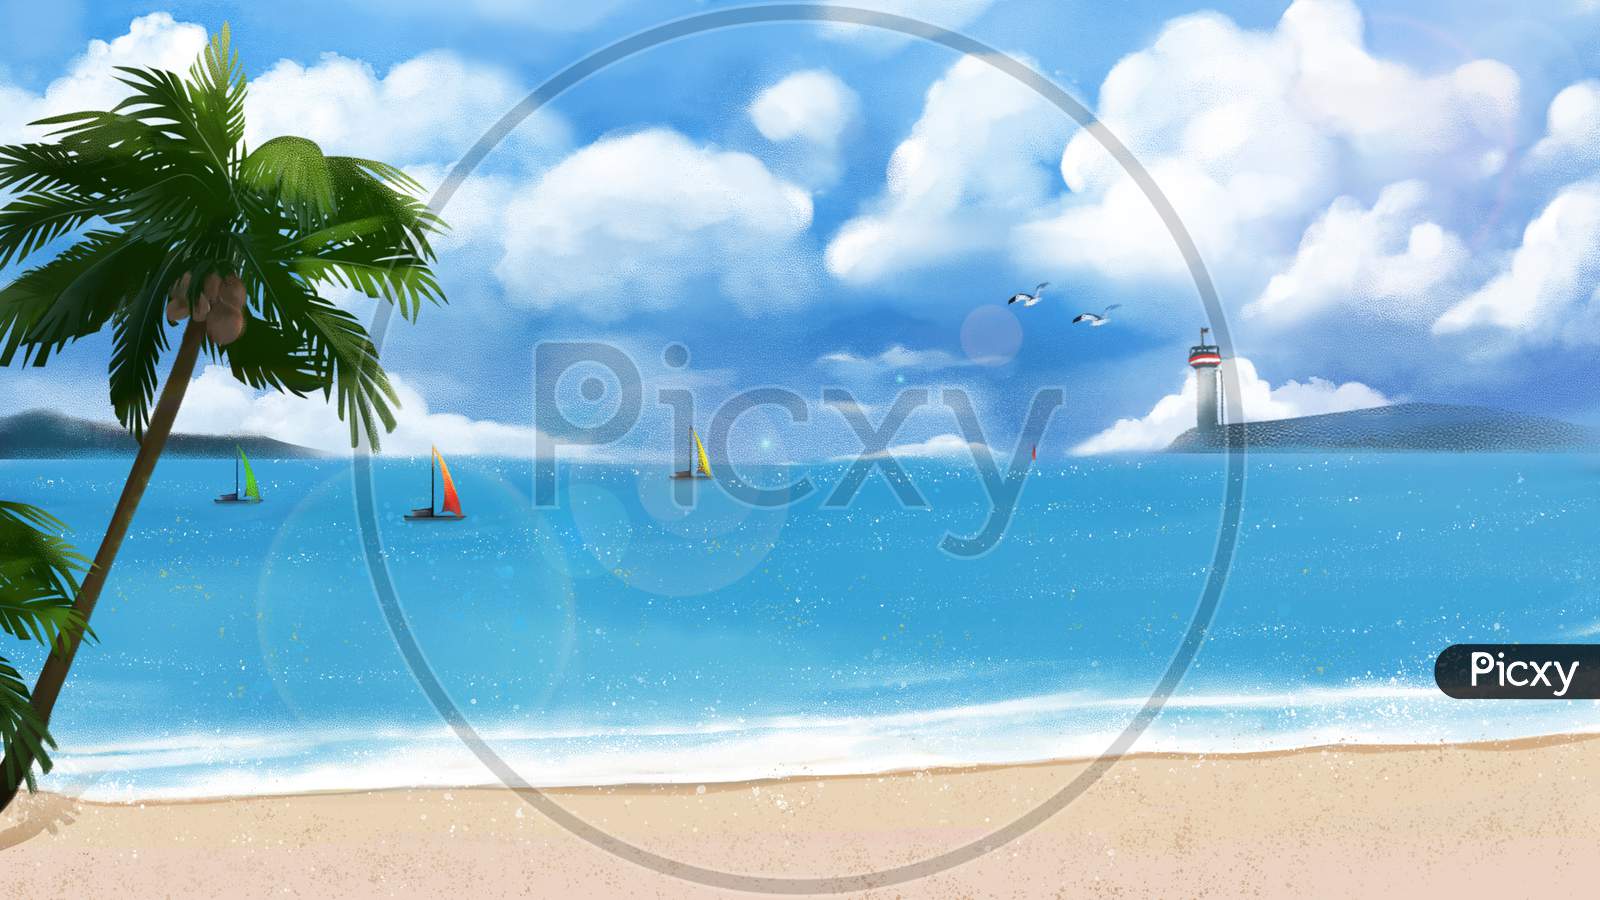 This amazing beach wave sky seagull illustration image can be perfectly used as background or wallpaper, and can also be integrated into published media, like posters, flyers, books, etc.